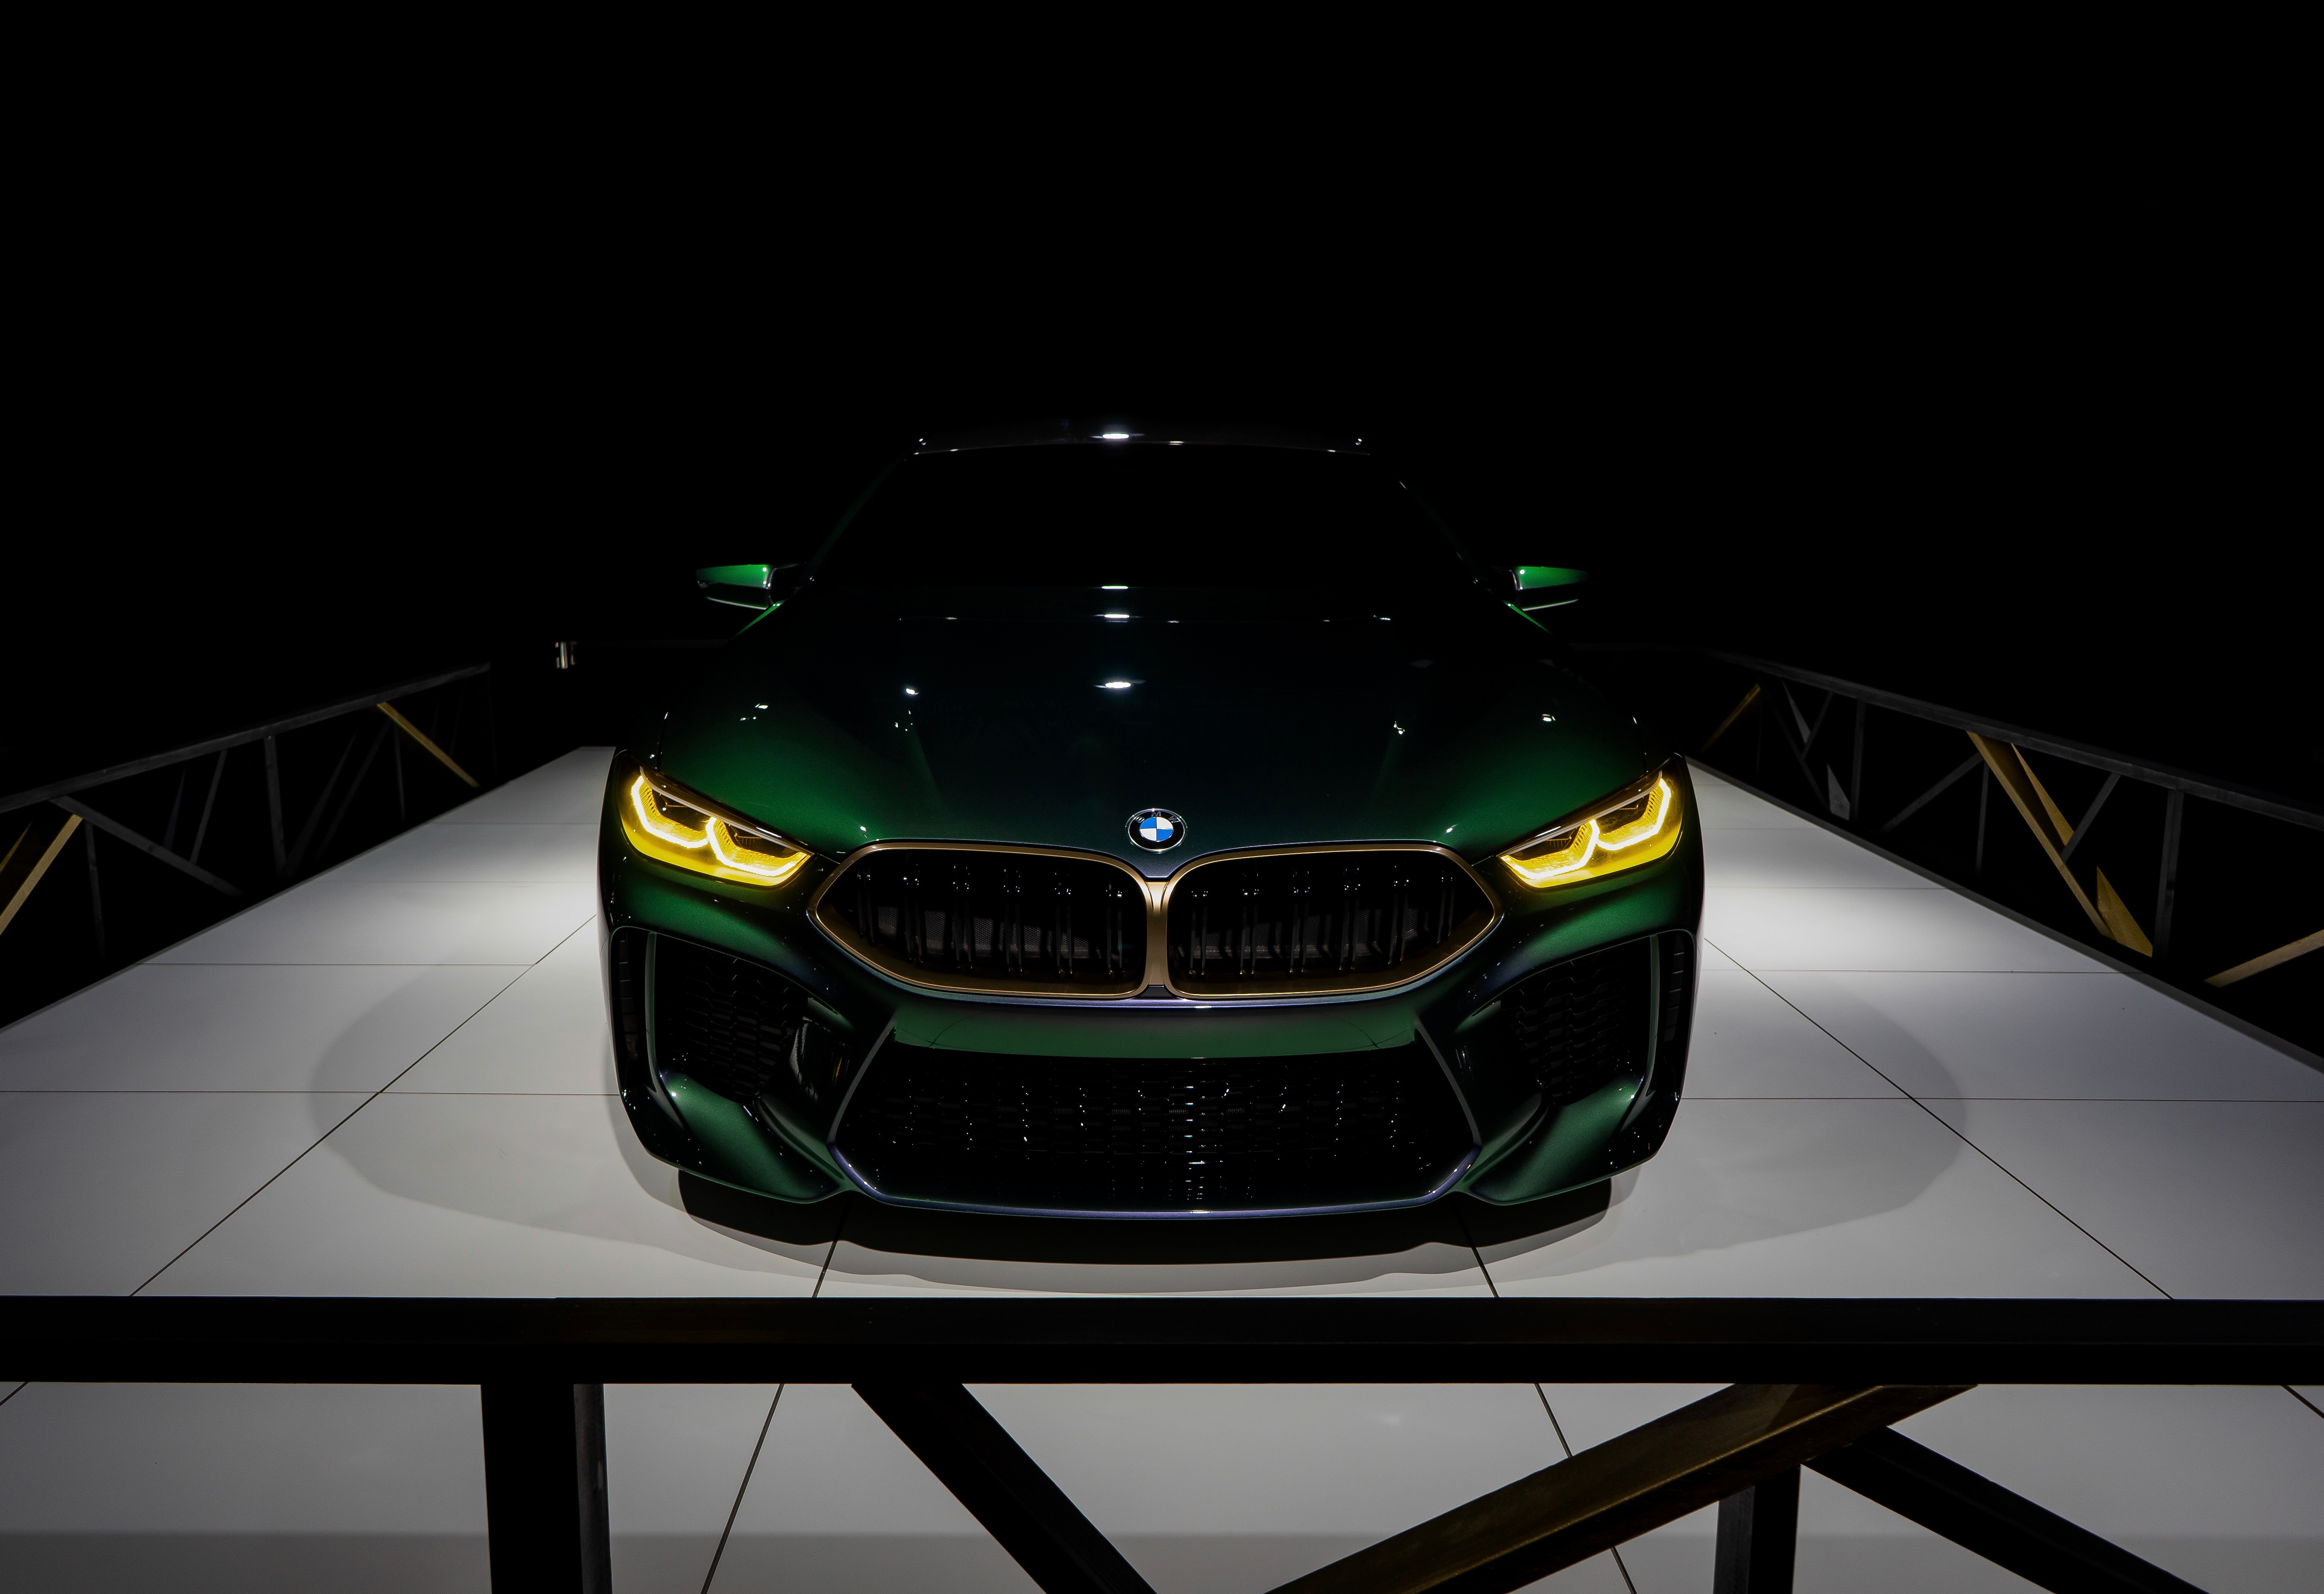 bmw, front view, cars, shadows, bumper High Definition image